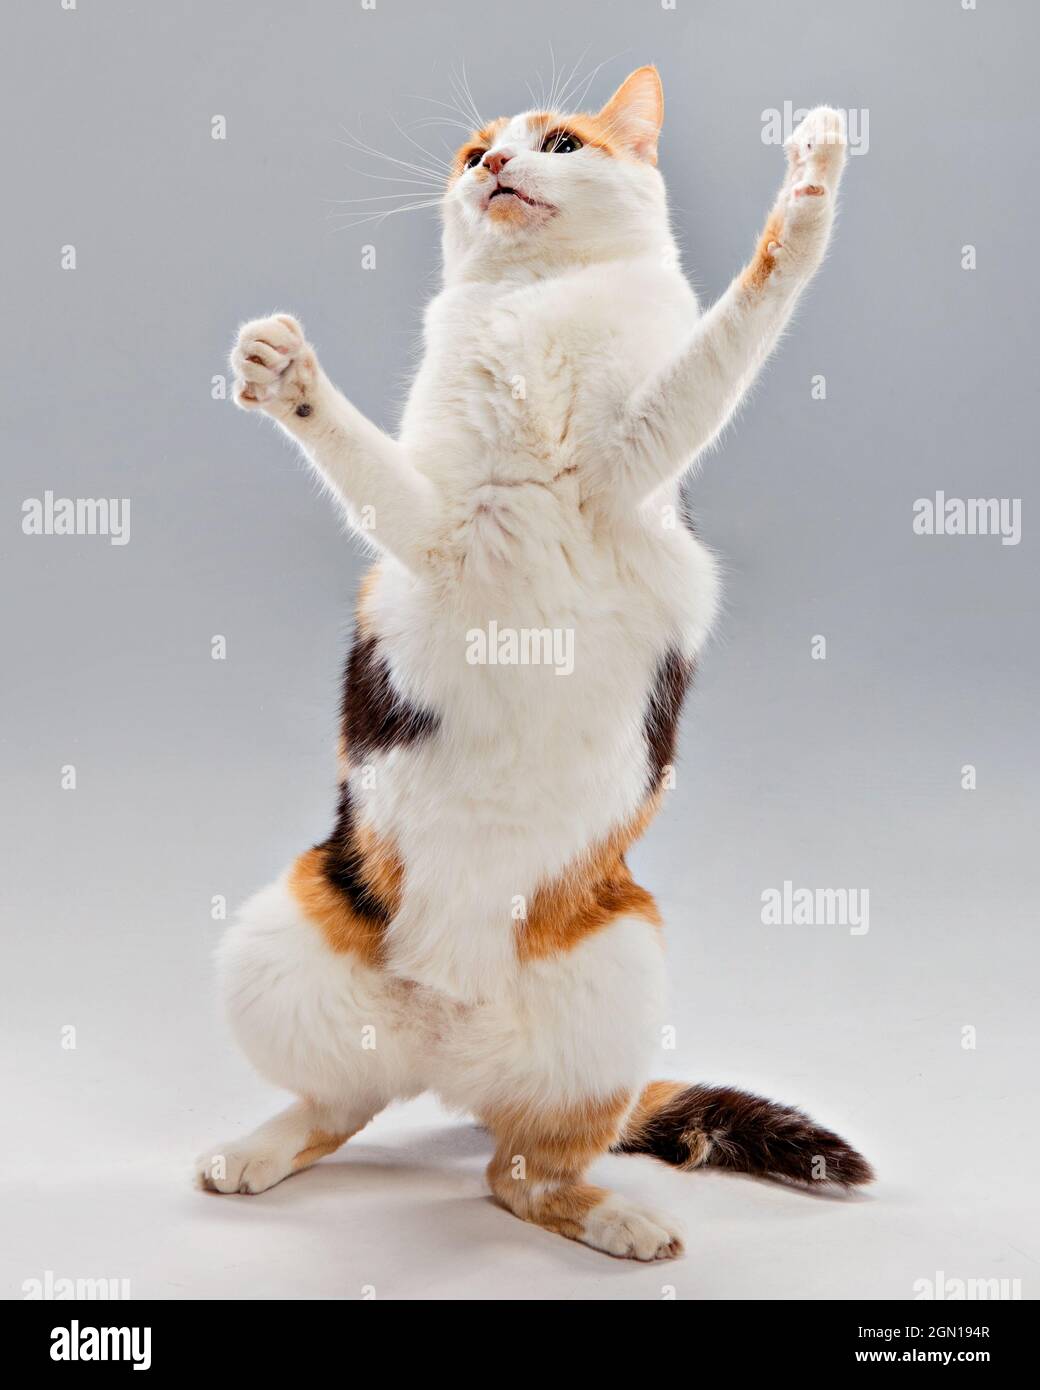 Studio portrait of a calico cat awkwardly standing on two legs with a humorous expression. Stock Photo